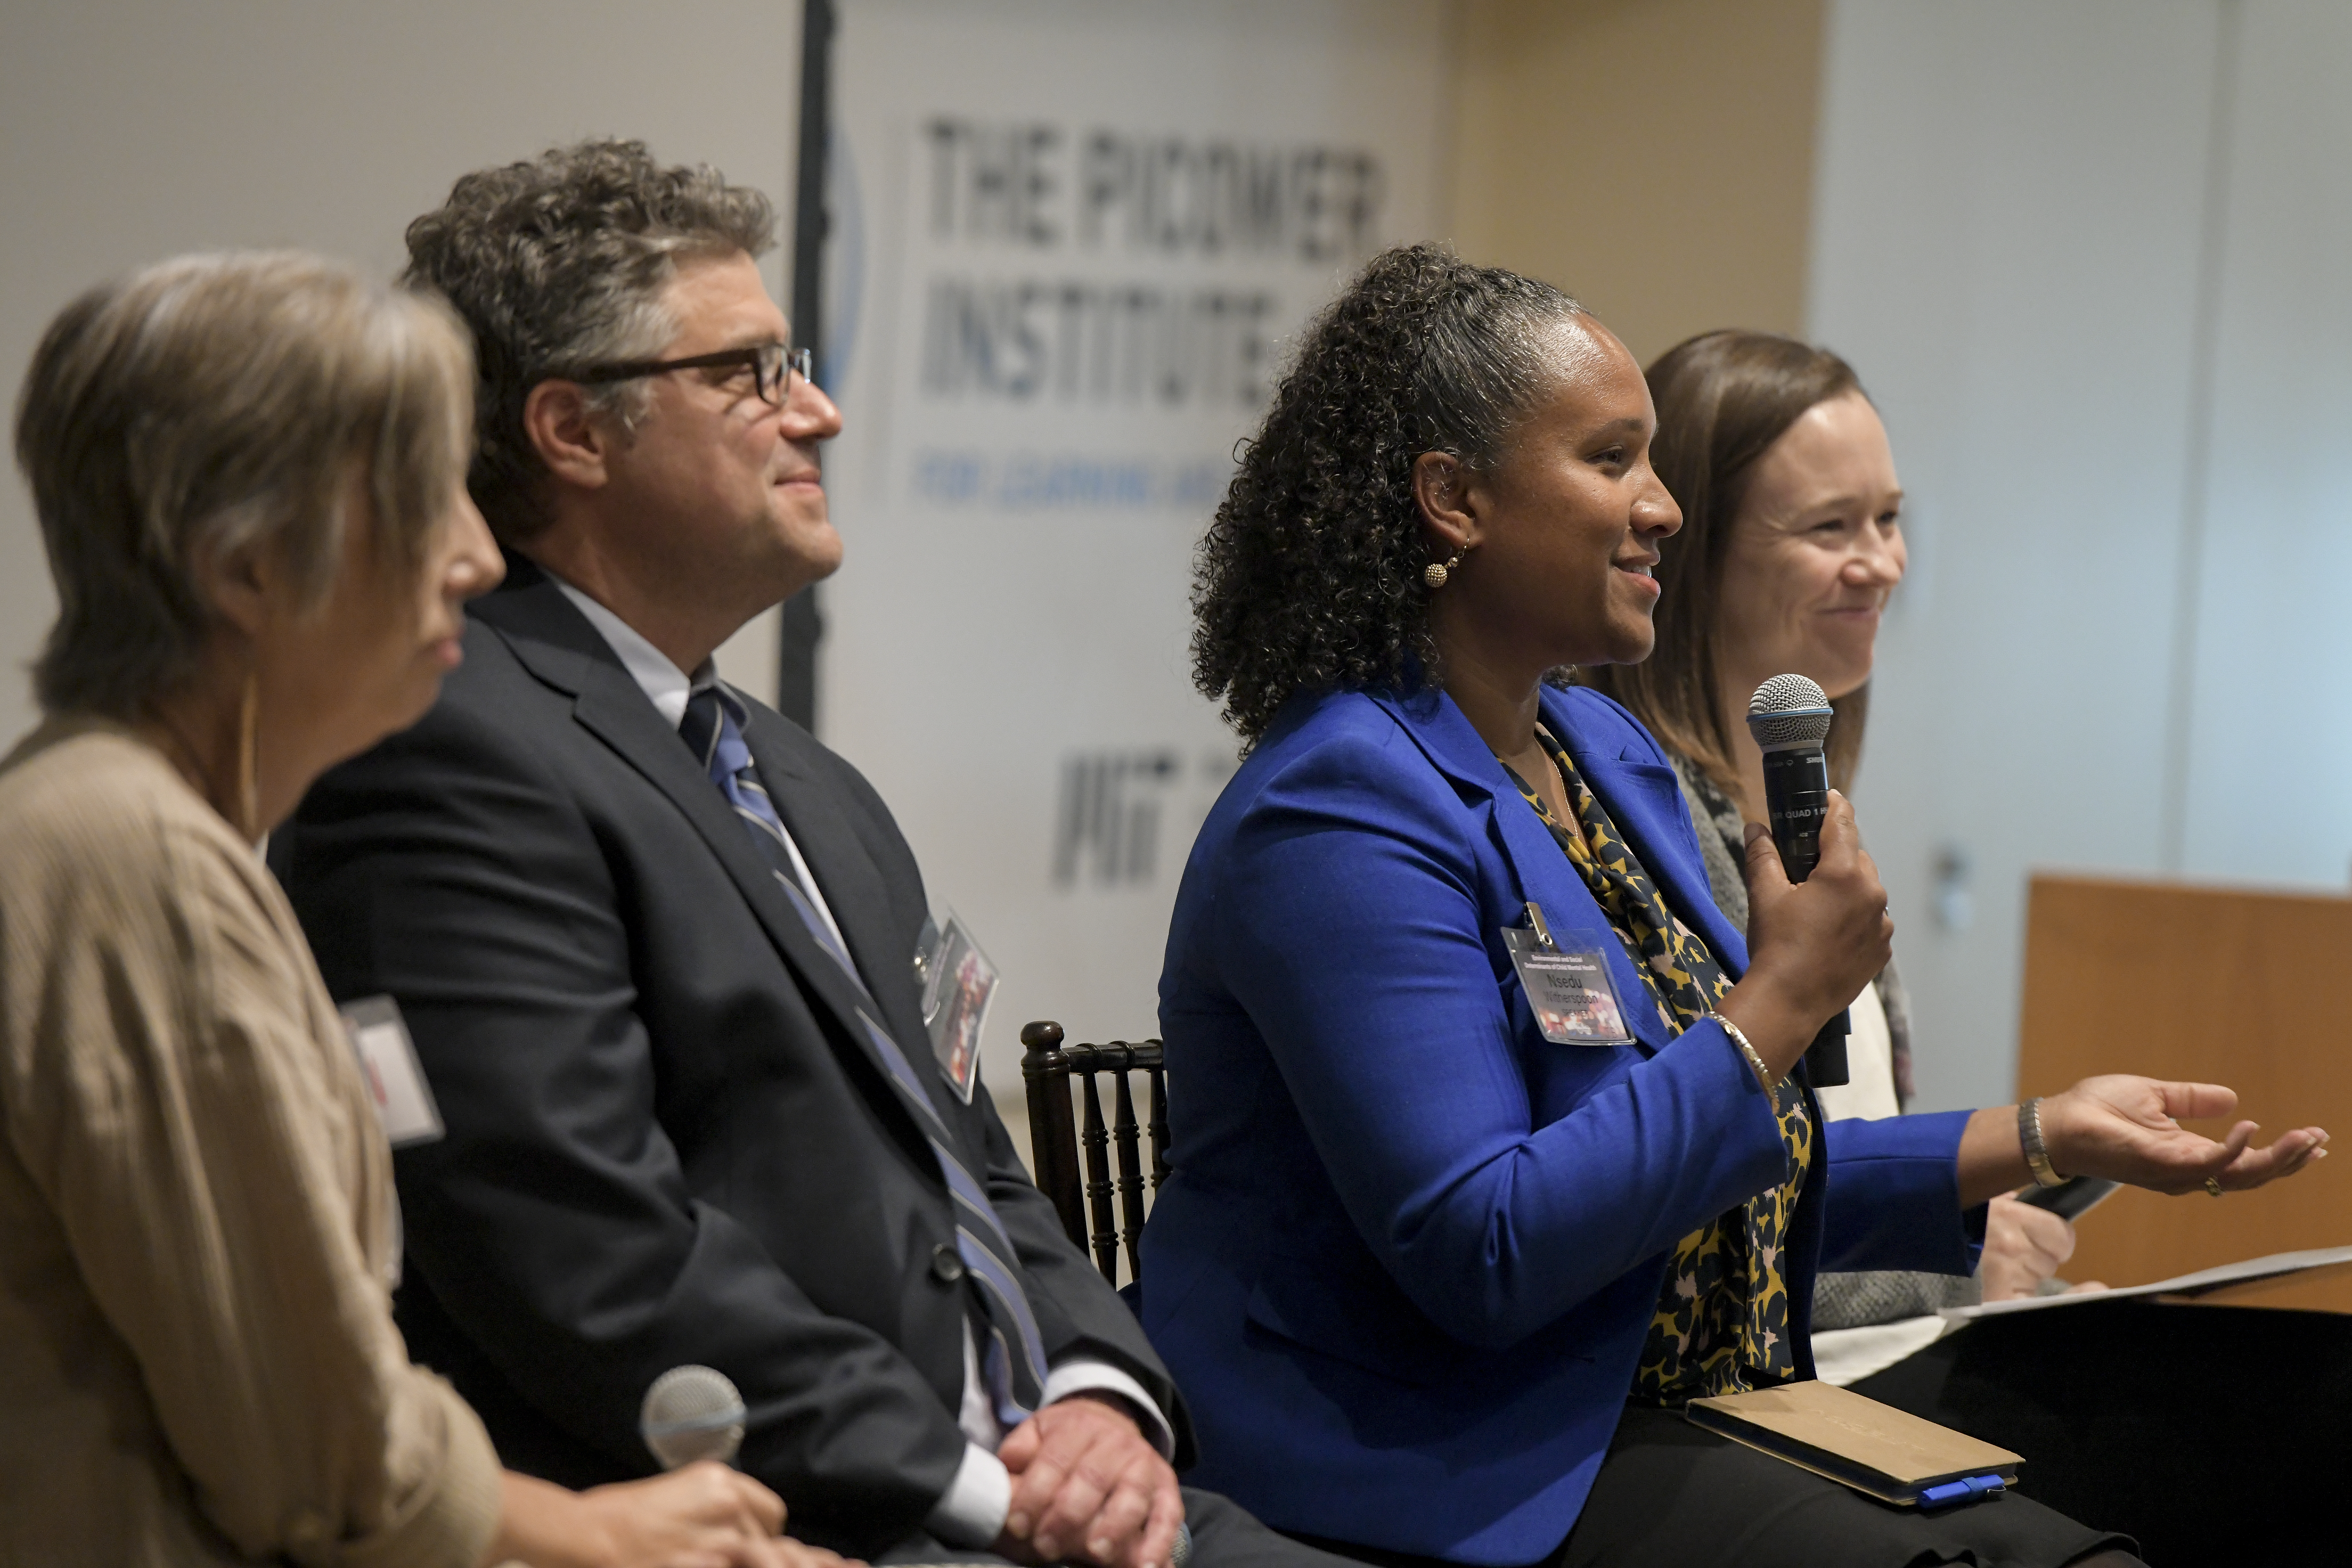 Four people -- three women and one man-- sit side by side. One woman. Nsedu Witherspoon, holds a microphone and is speaking.  The Picower Institute logo is in the background